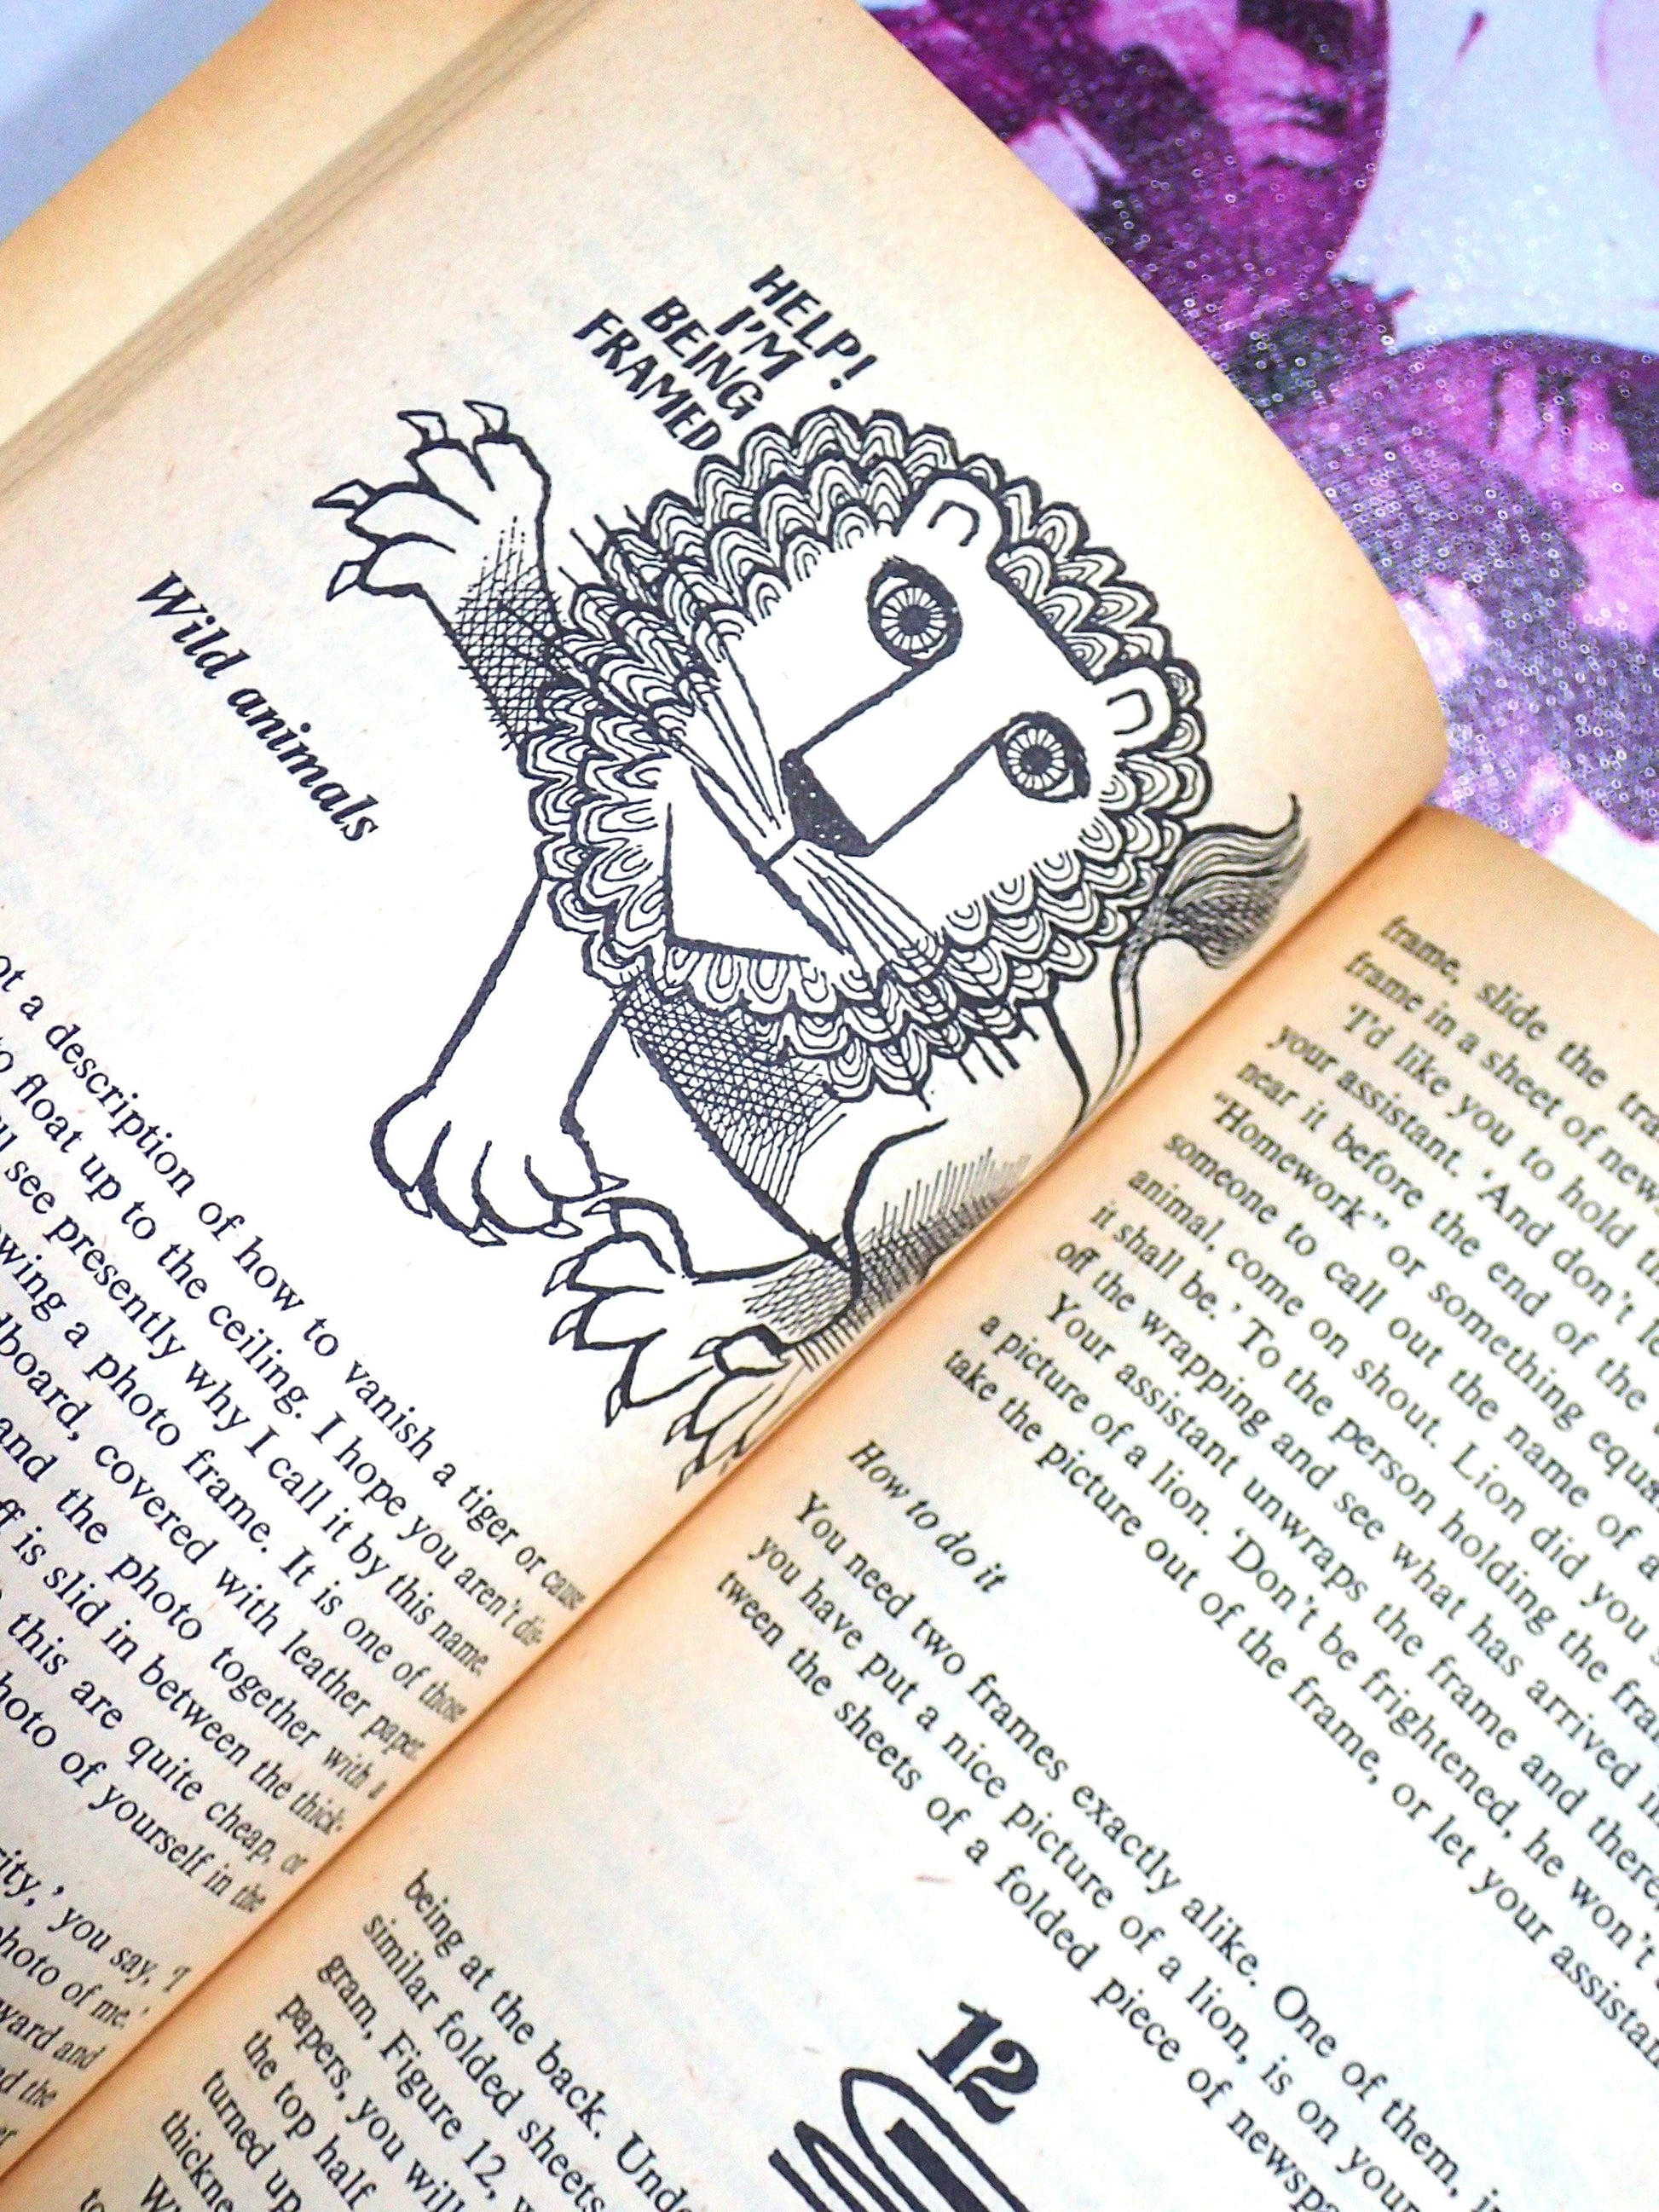 Lion-illustration-in-vintage-childrens-Puffin-Book-of-Magic